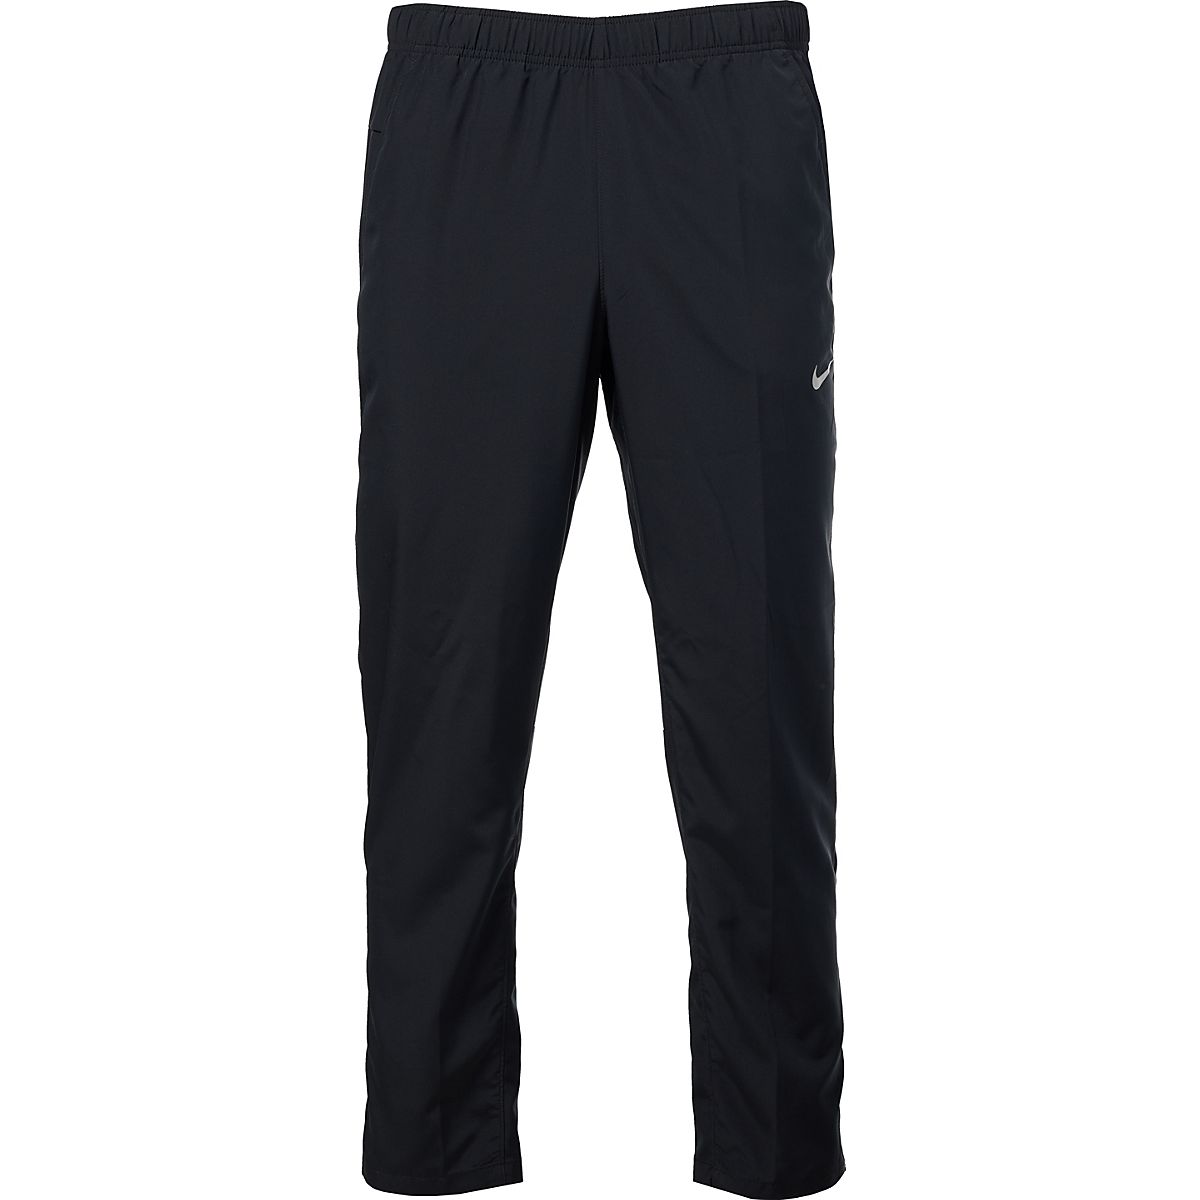 Nike Men's Fitness Pants | Free Shipping at Academy